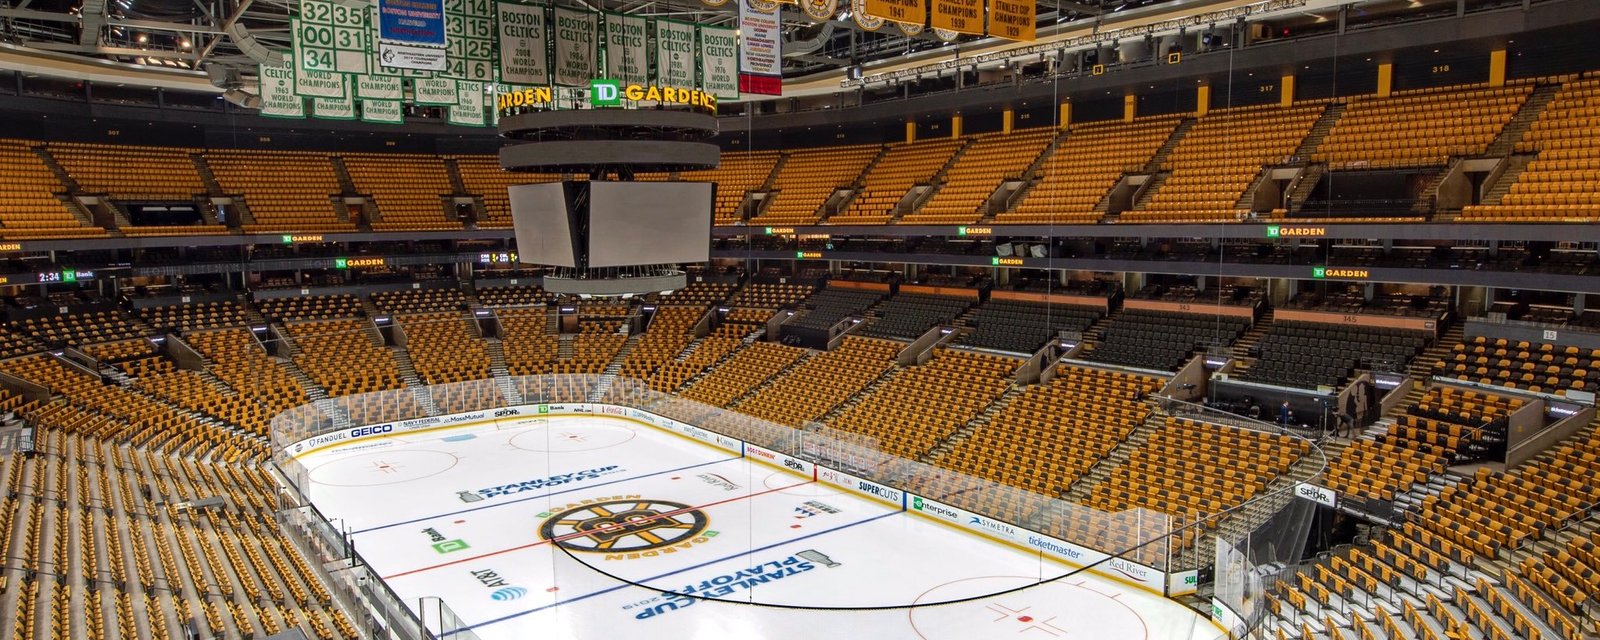 Boston’s TD Garden change iconic feature of the arena ahead of 2019-20 season